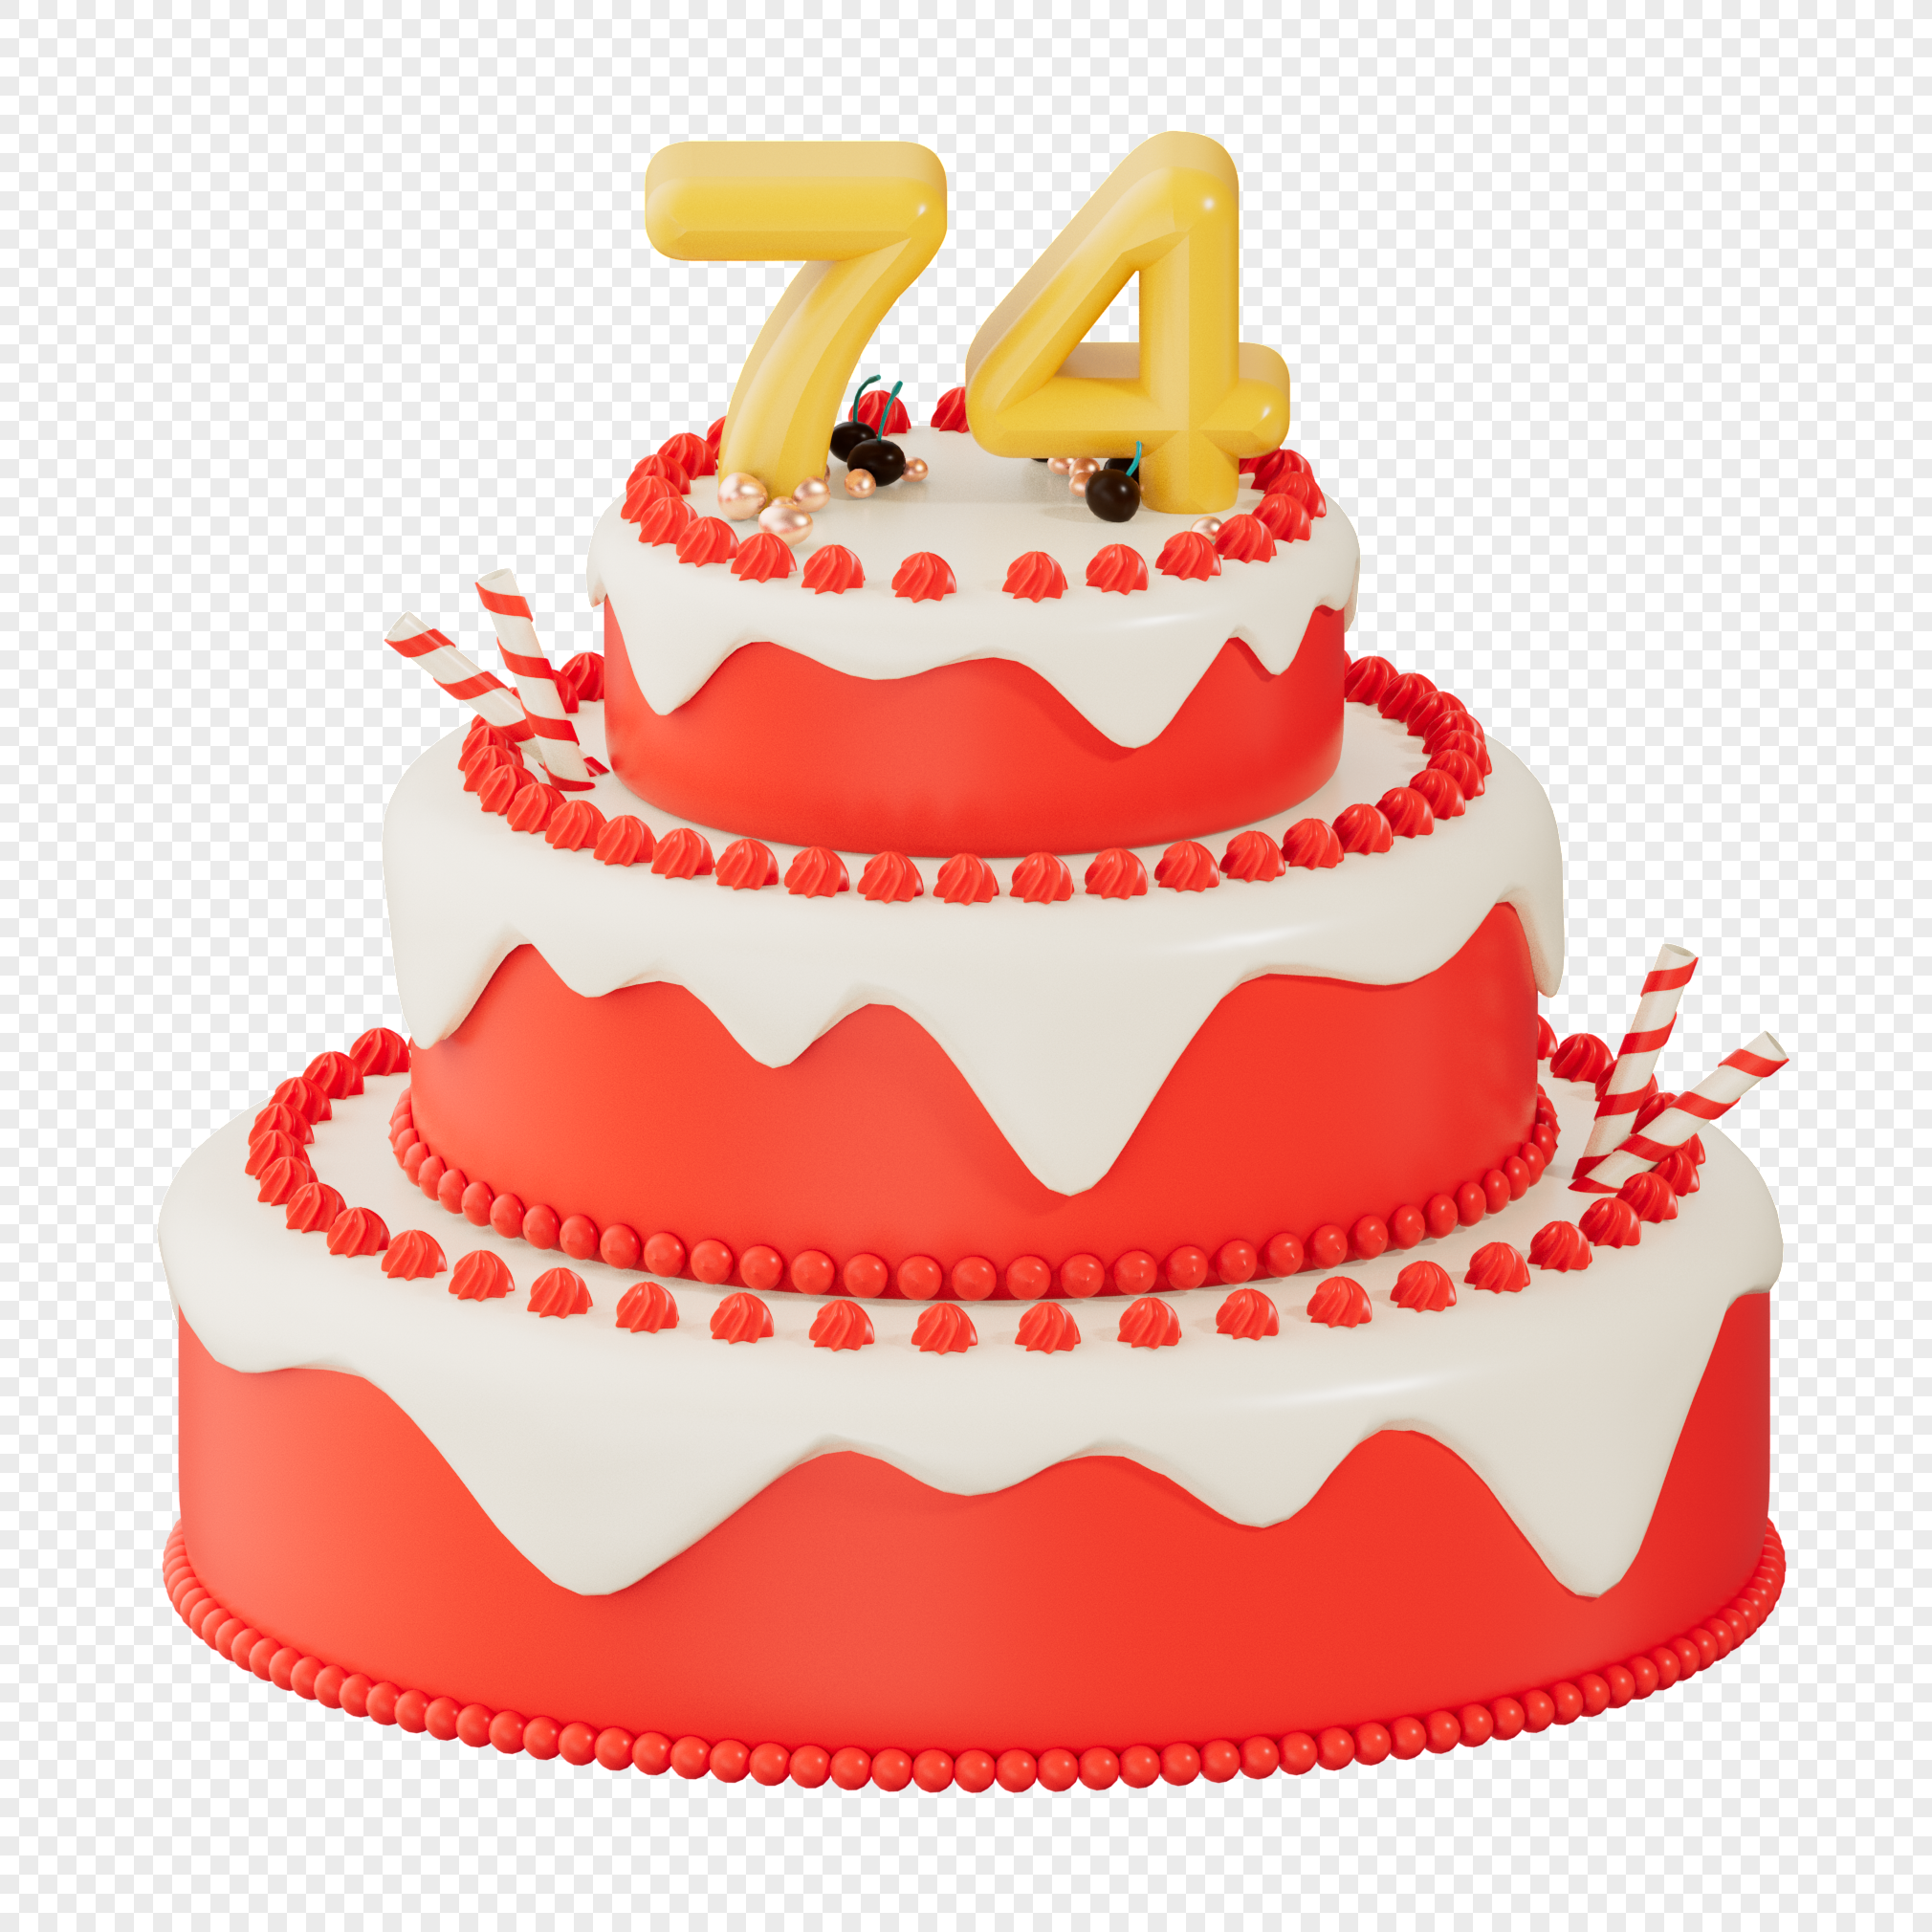 13,673 Realistic Cake Vector Images, Stock Photos, 3D objects, & Vectors |  Shutterstock